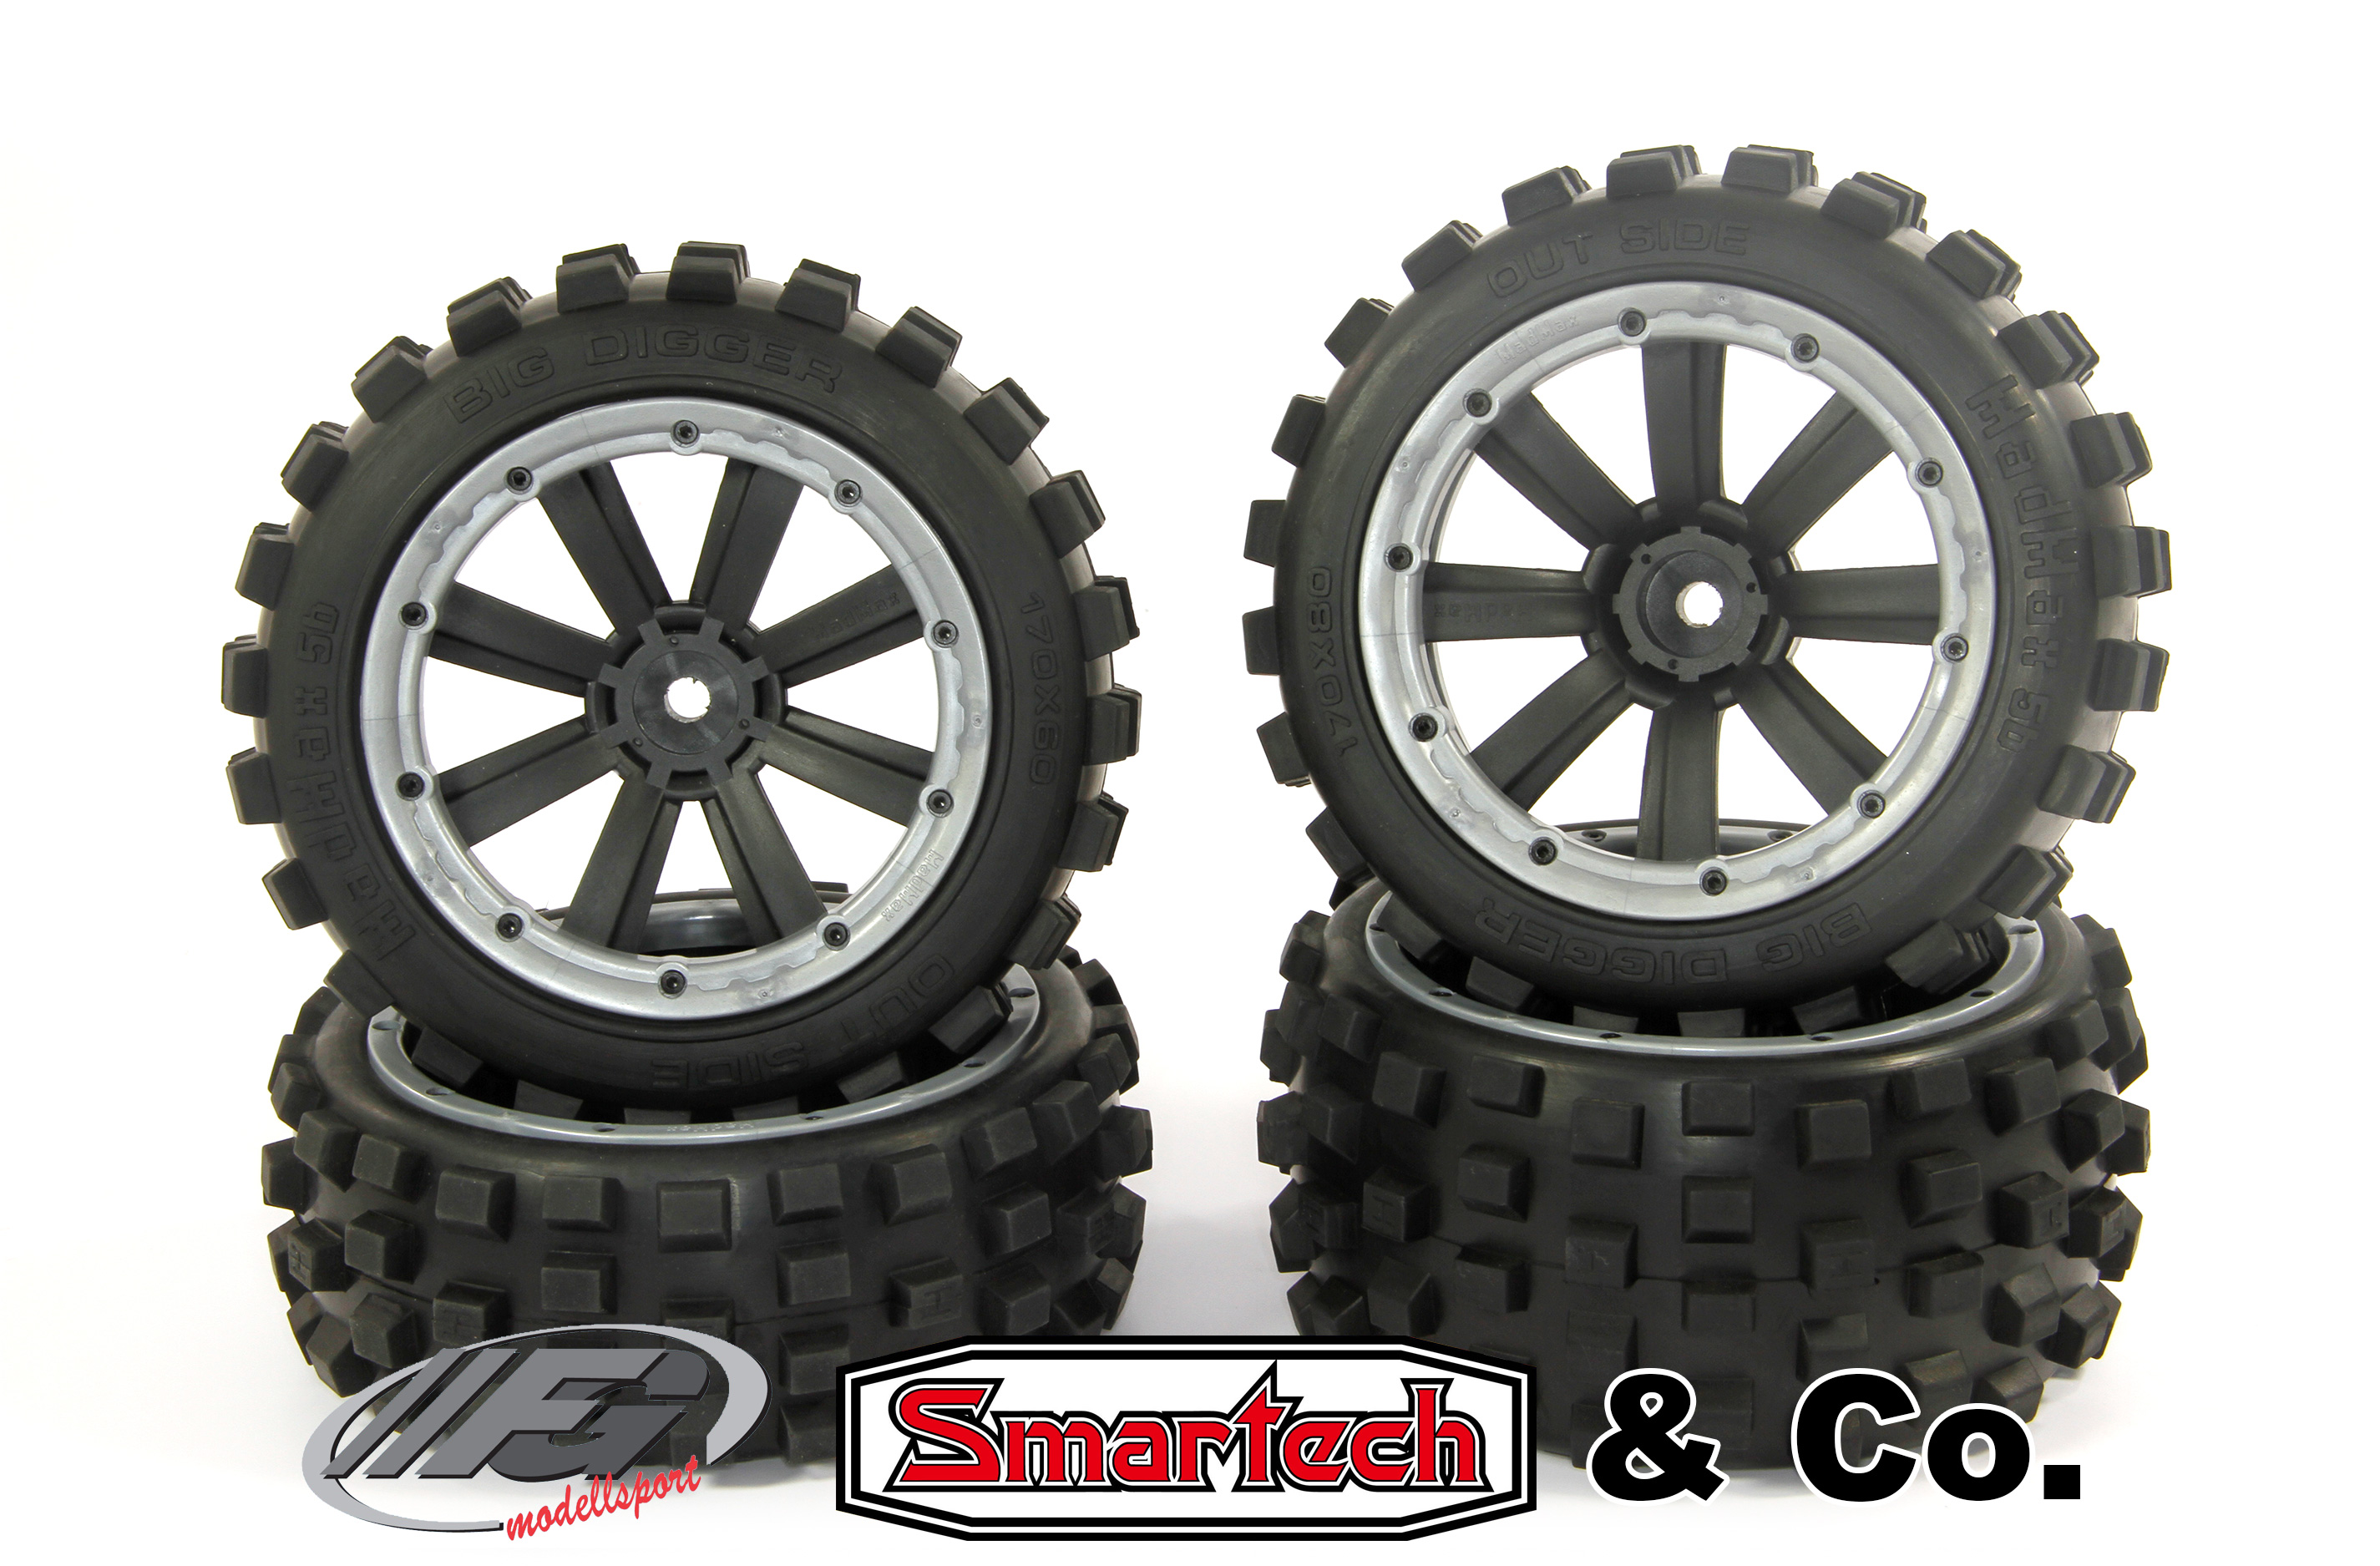 y1401/01 MadMax BIG DIGGER 170x80/x60 tires for FG/Smartech and other (18 mm square drive)